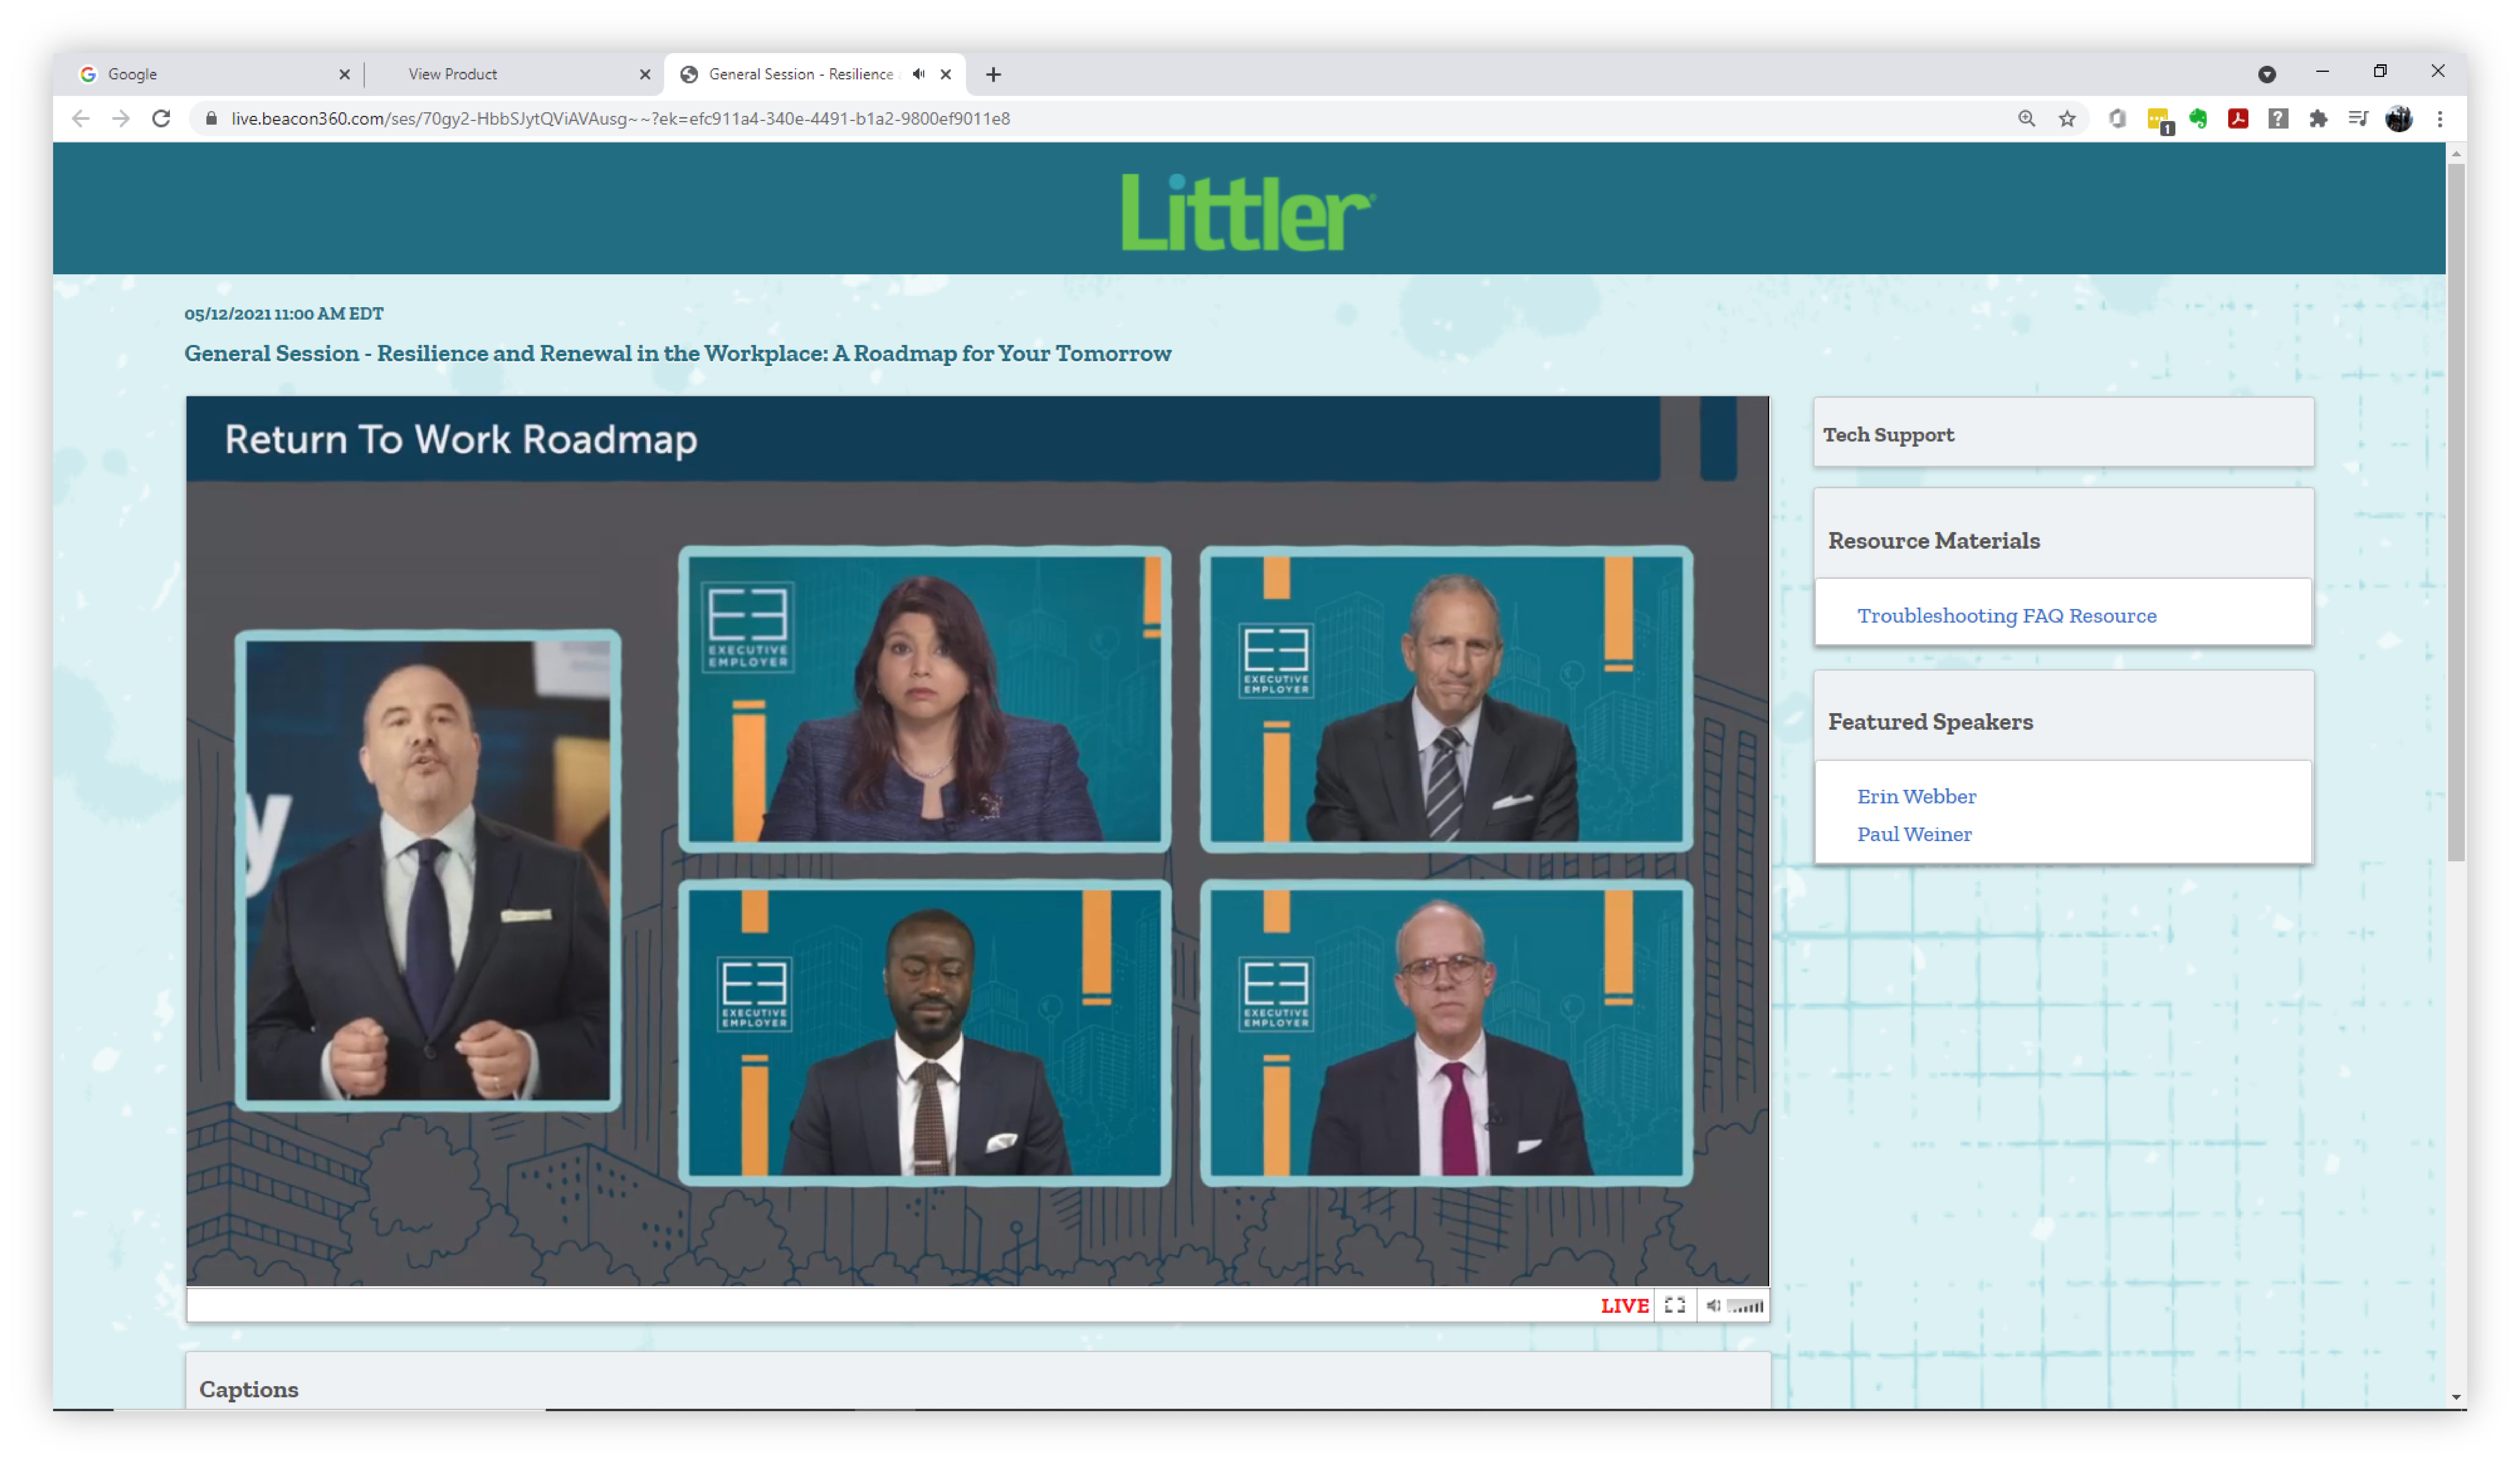 A screenshot of multiple speakers in a virtual conference